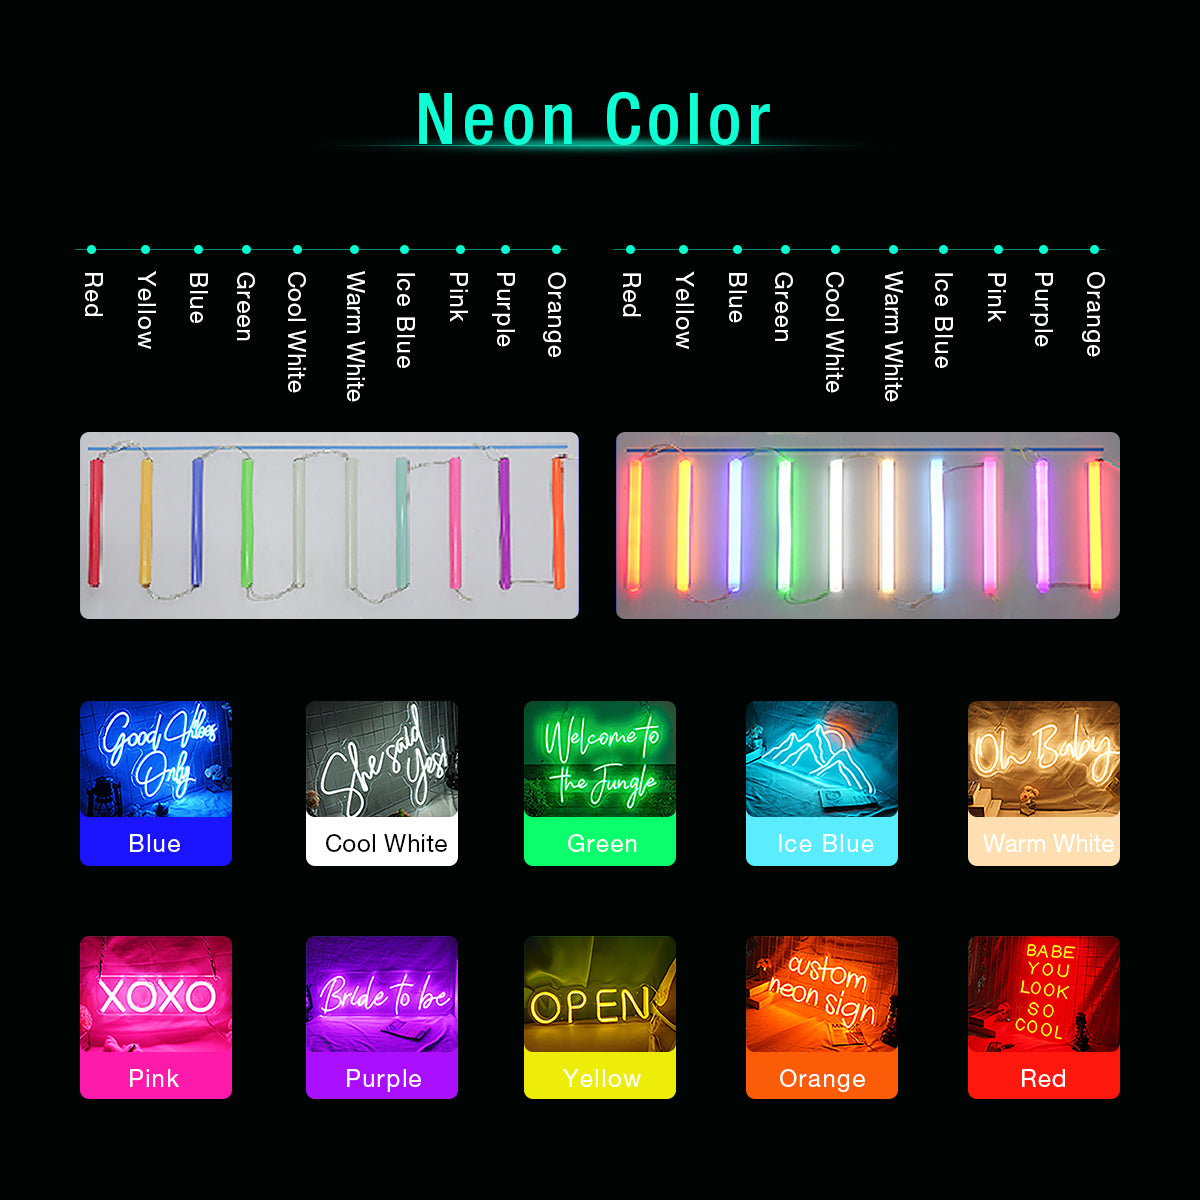 NEONIP-Personalized 100% Handmade Wedding LED Neon Sign with Til Death